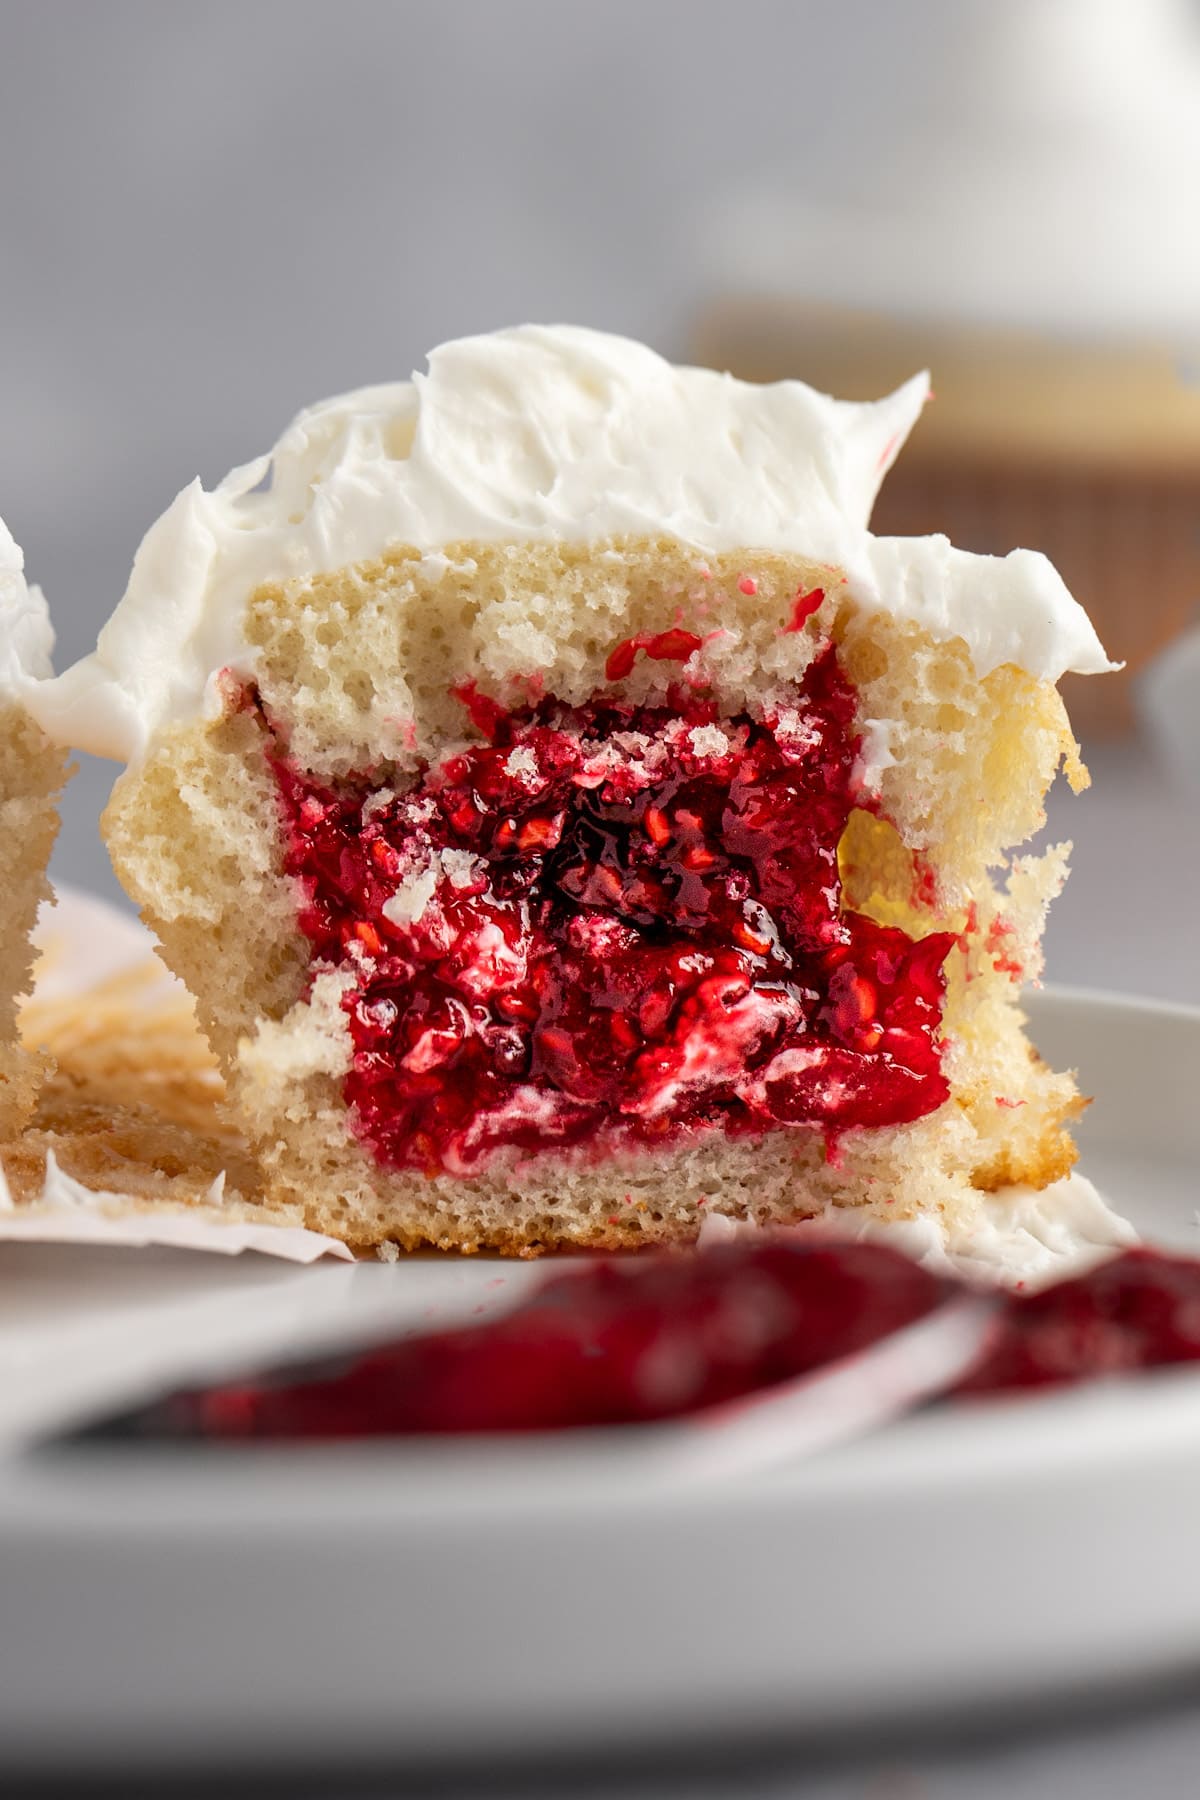 A cupcake cut in half, filled with raspberry filling.